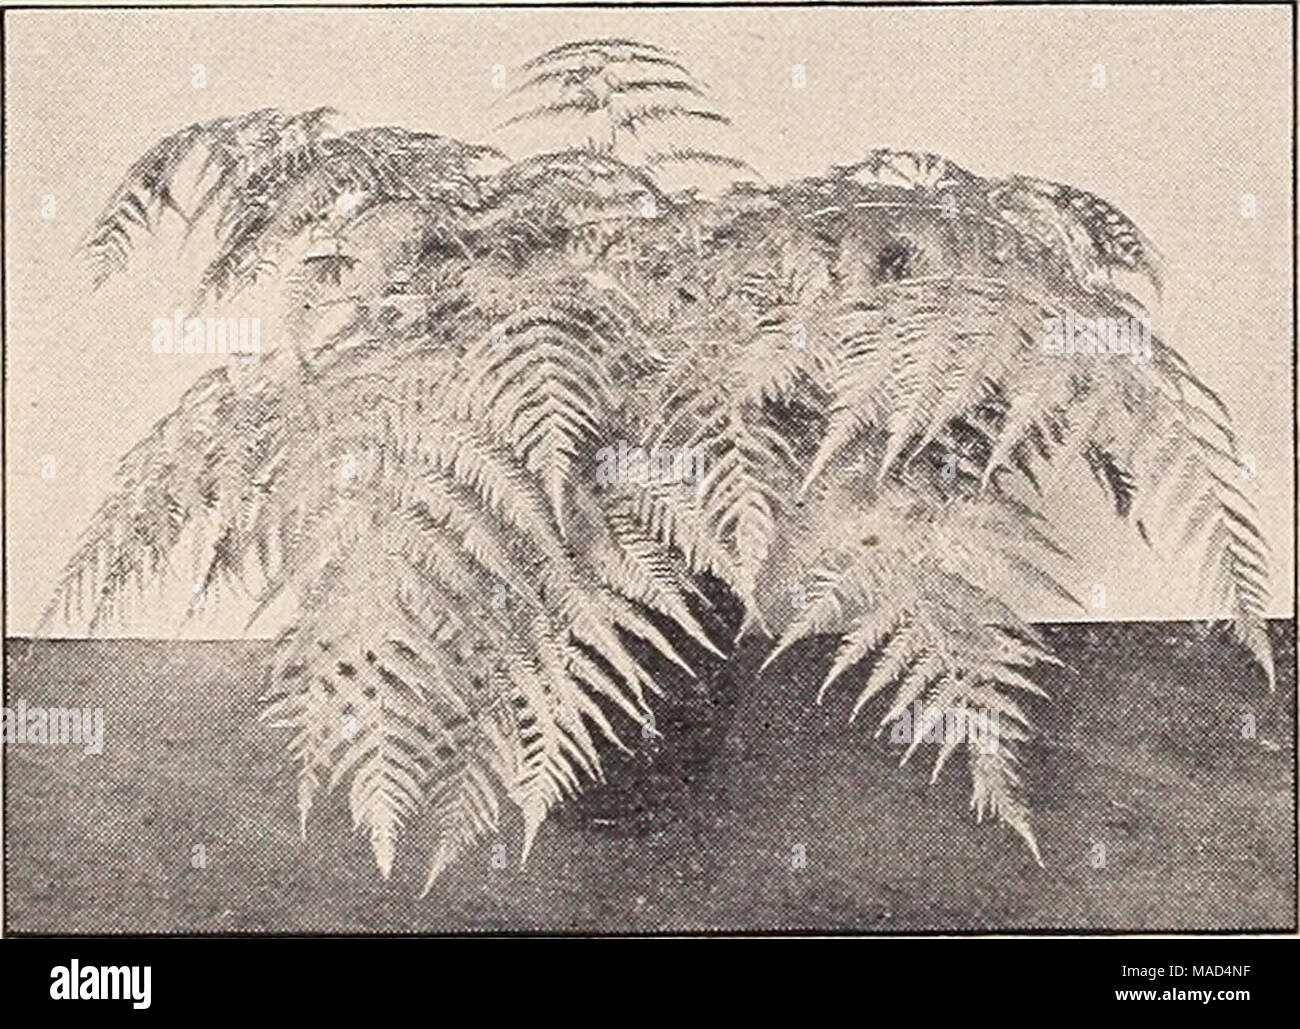 . Dreer's wholesale catalog for florists and market gardeners : autumn 1940 edition . Cibotium Schiedel Cibotium Schiedei—Mexican Tree Fern One of the most desirable and most valuable Ferns for room decoration. Grows to considerable size and is most attractive with its lovely large fronds of a beau- tiful liglit .^reen color. A beautiful lot of strong specimen plants. Each Splendid plants in 10-lnch tubs $6 00 Special prices on quantity lots. Cyrtomium Rochfordianum compactum The Improved Holly Fern Next to the Boston Ferns this Holly Fern Is the most satisfactory for home and apartment use be Stock Photo